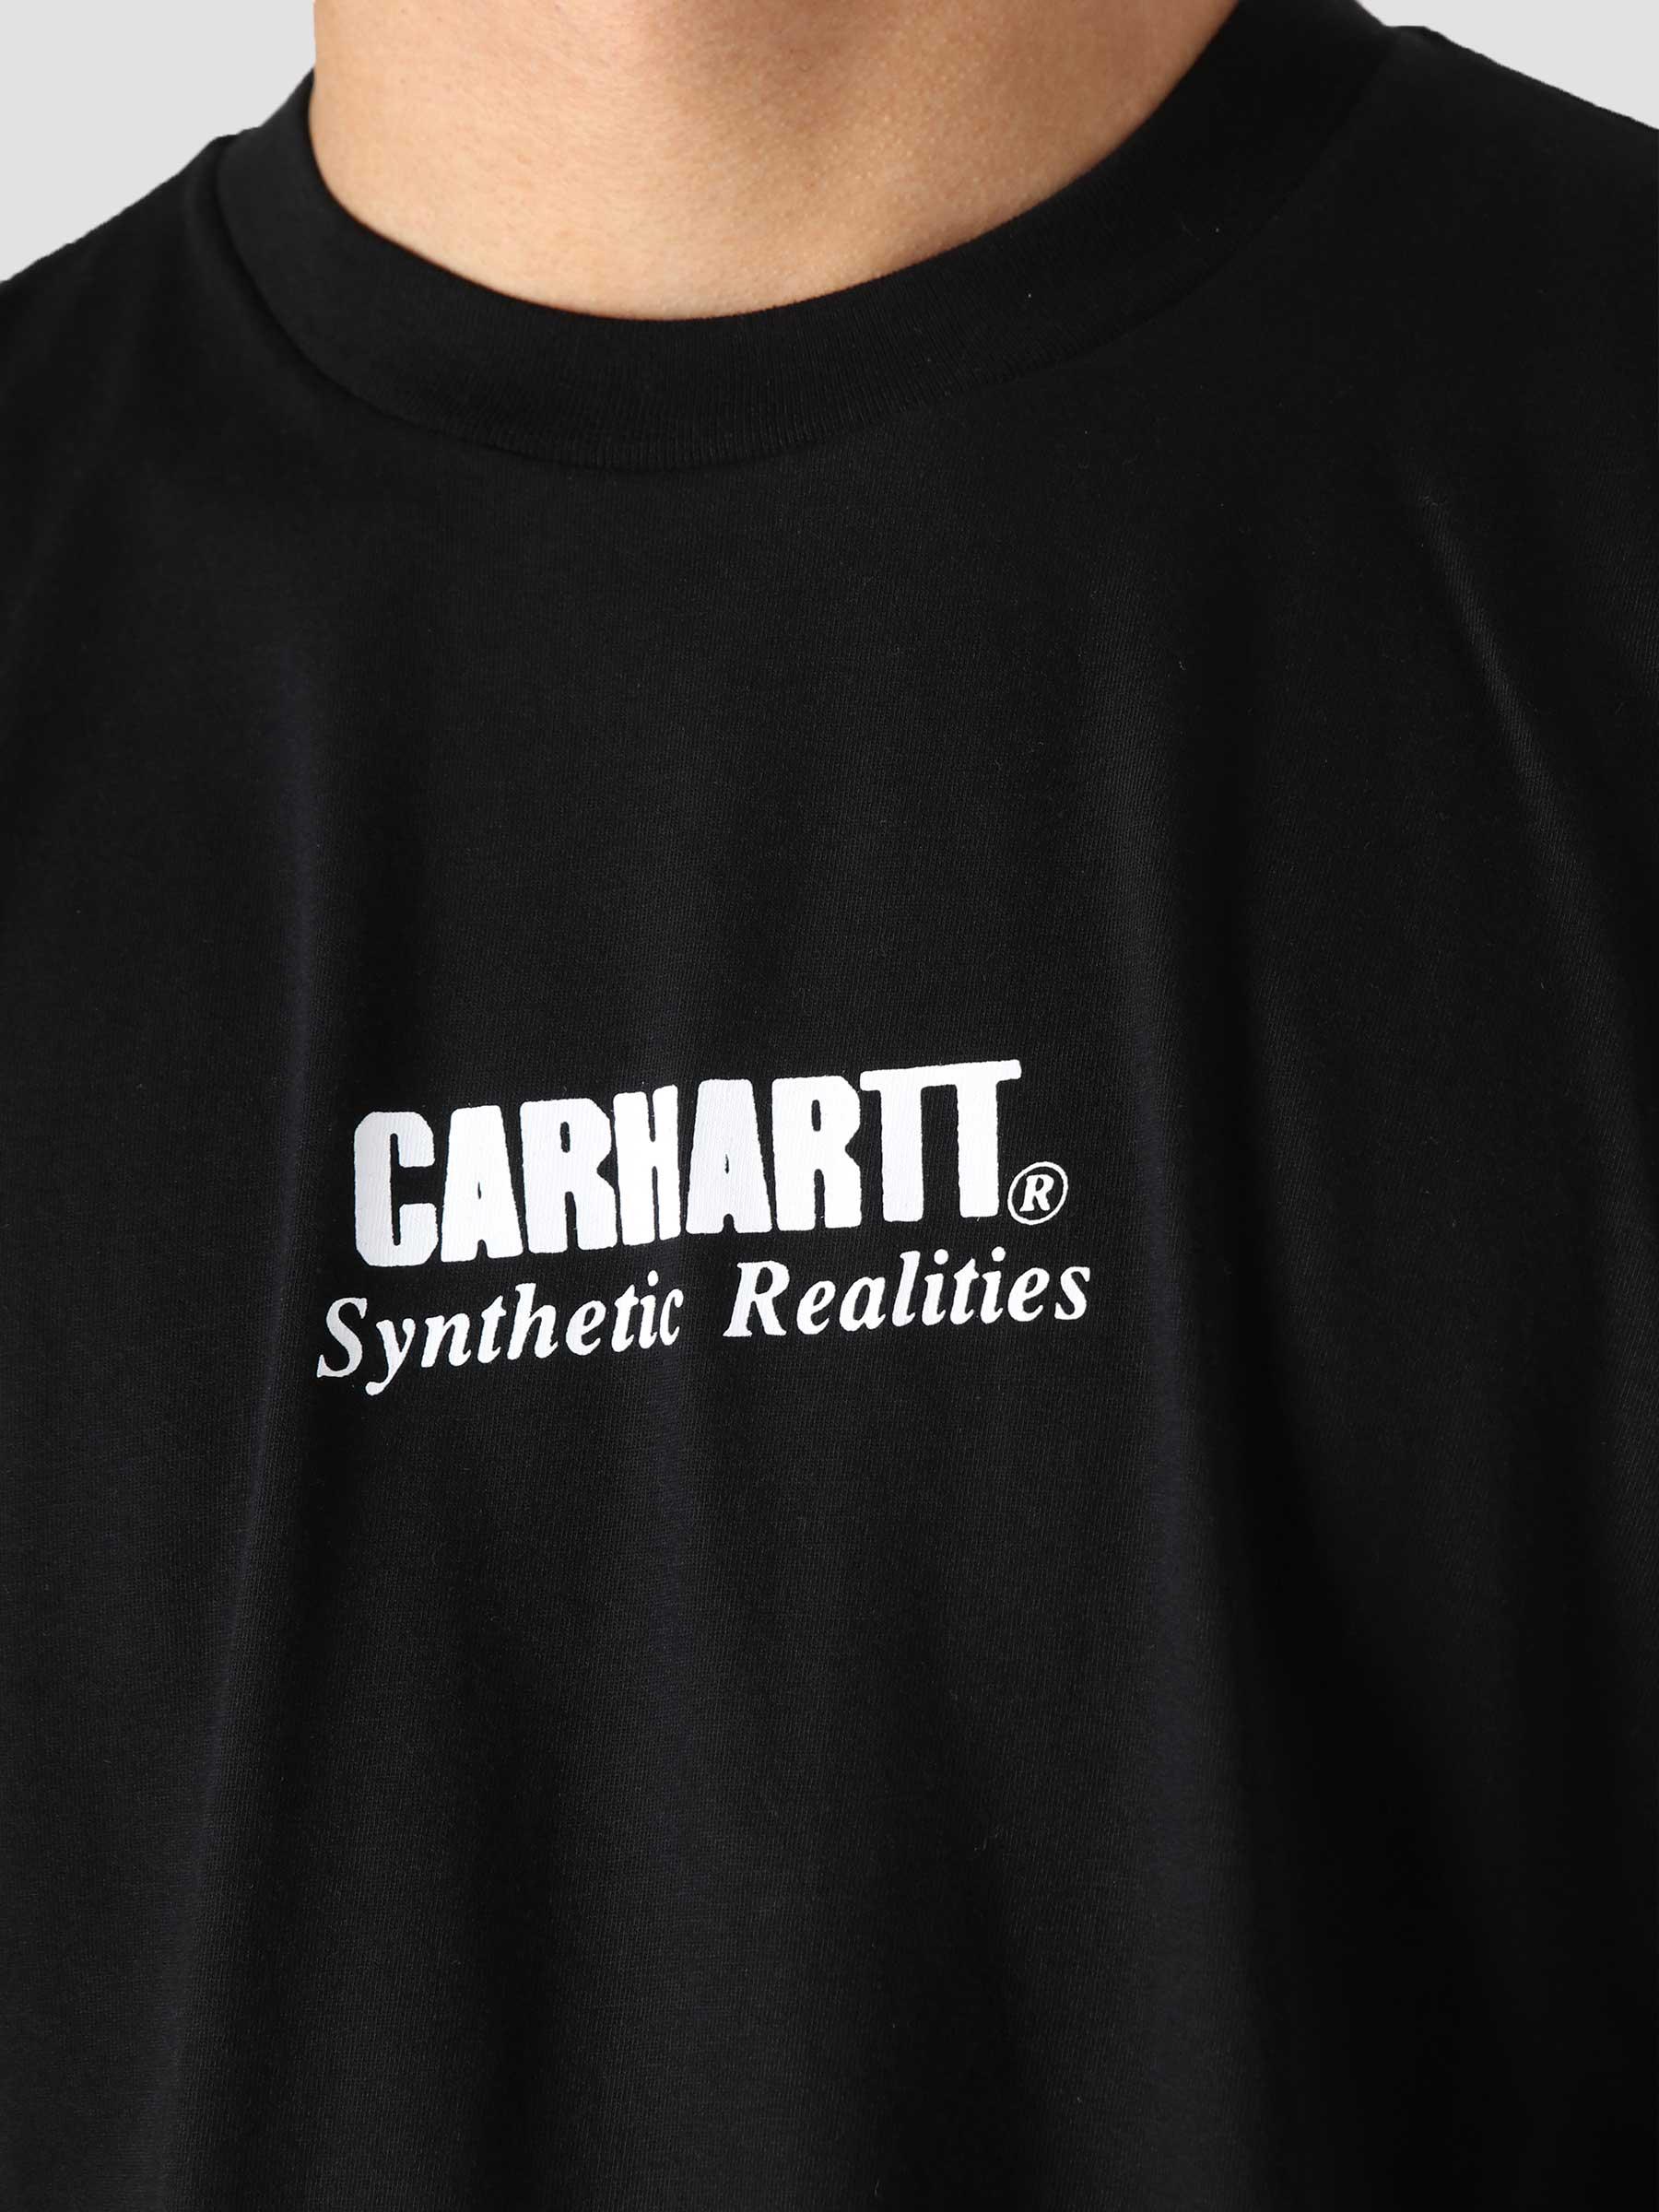 S/S Synthetic Realities T-S Black White I029980-0D2XX